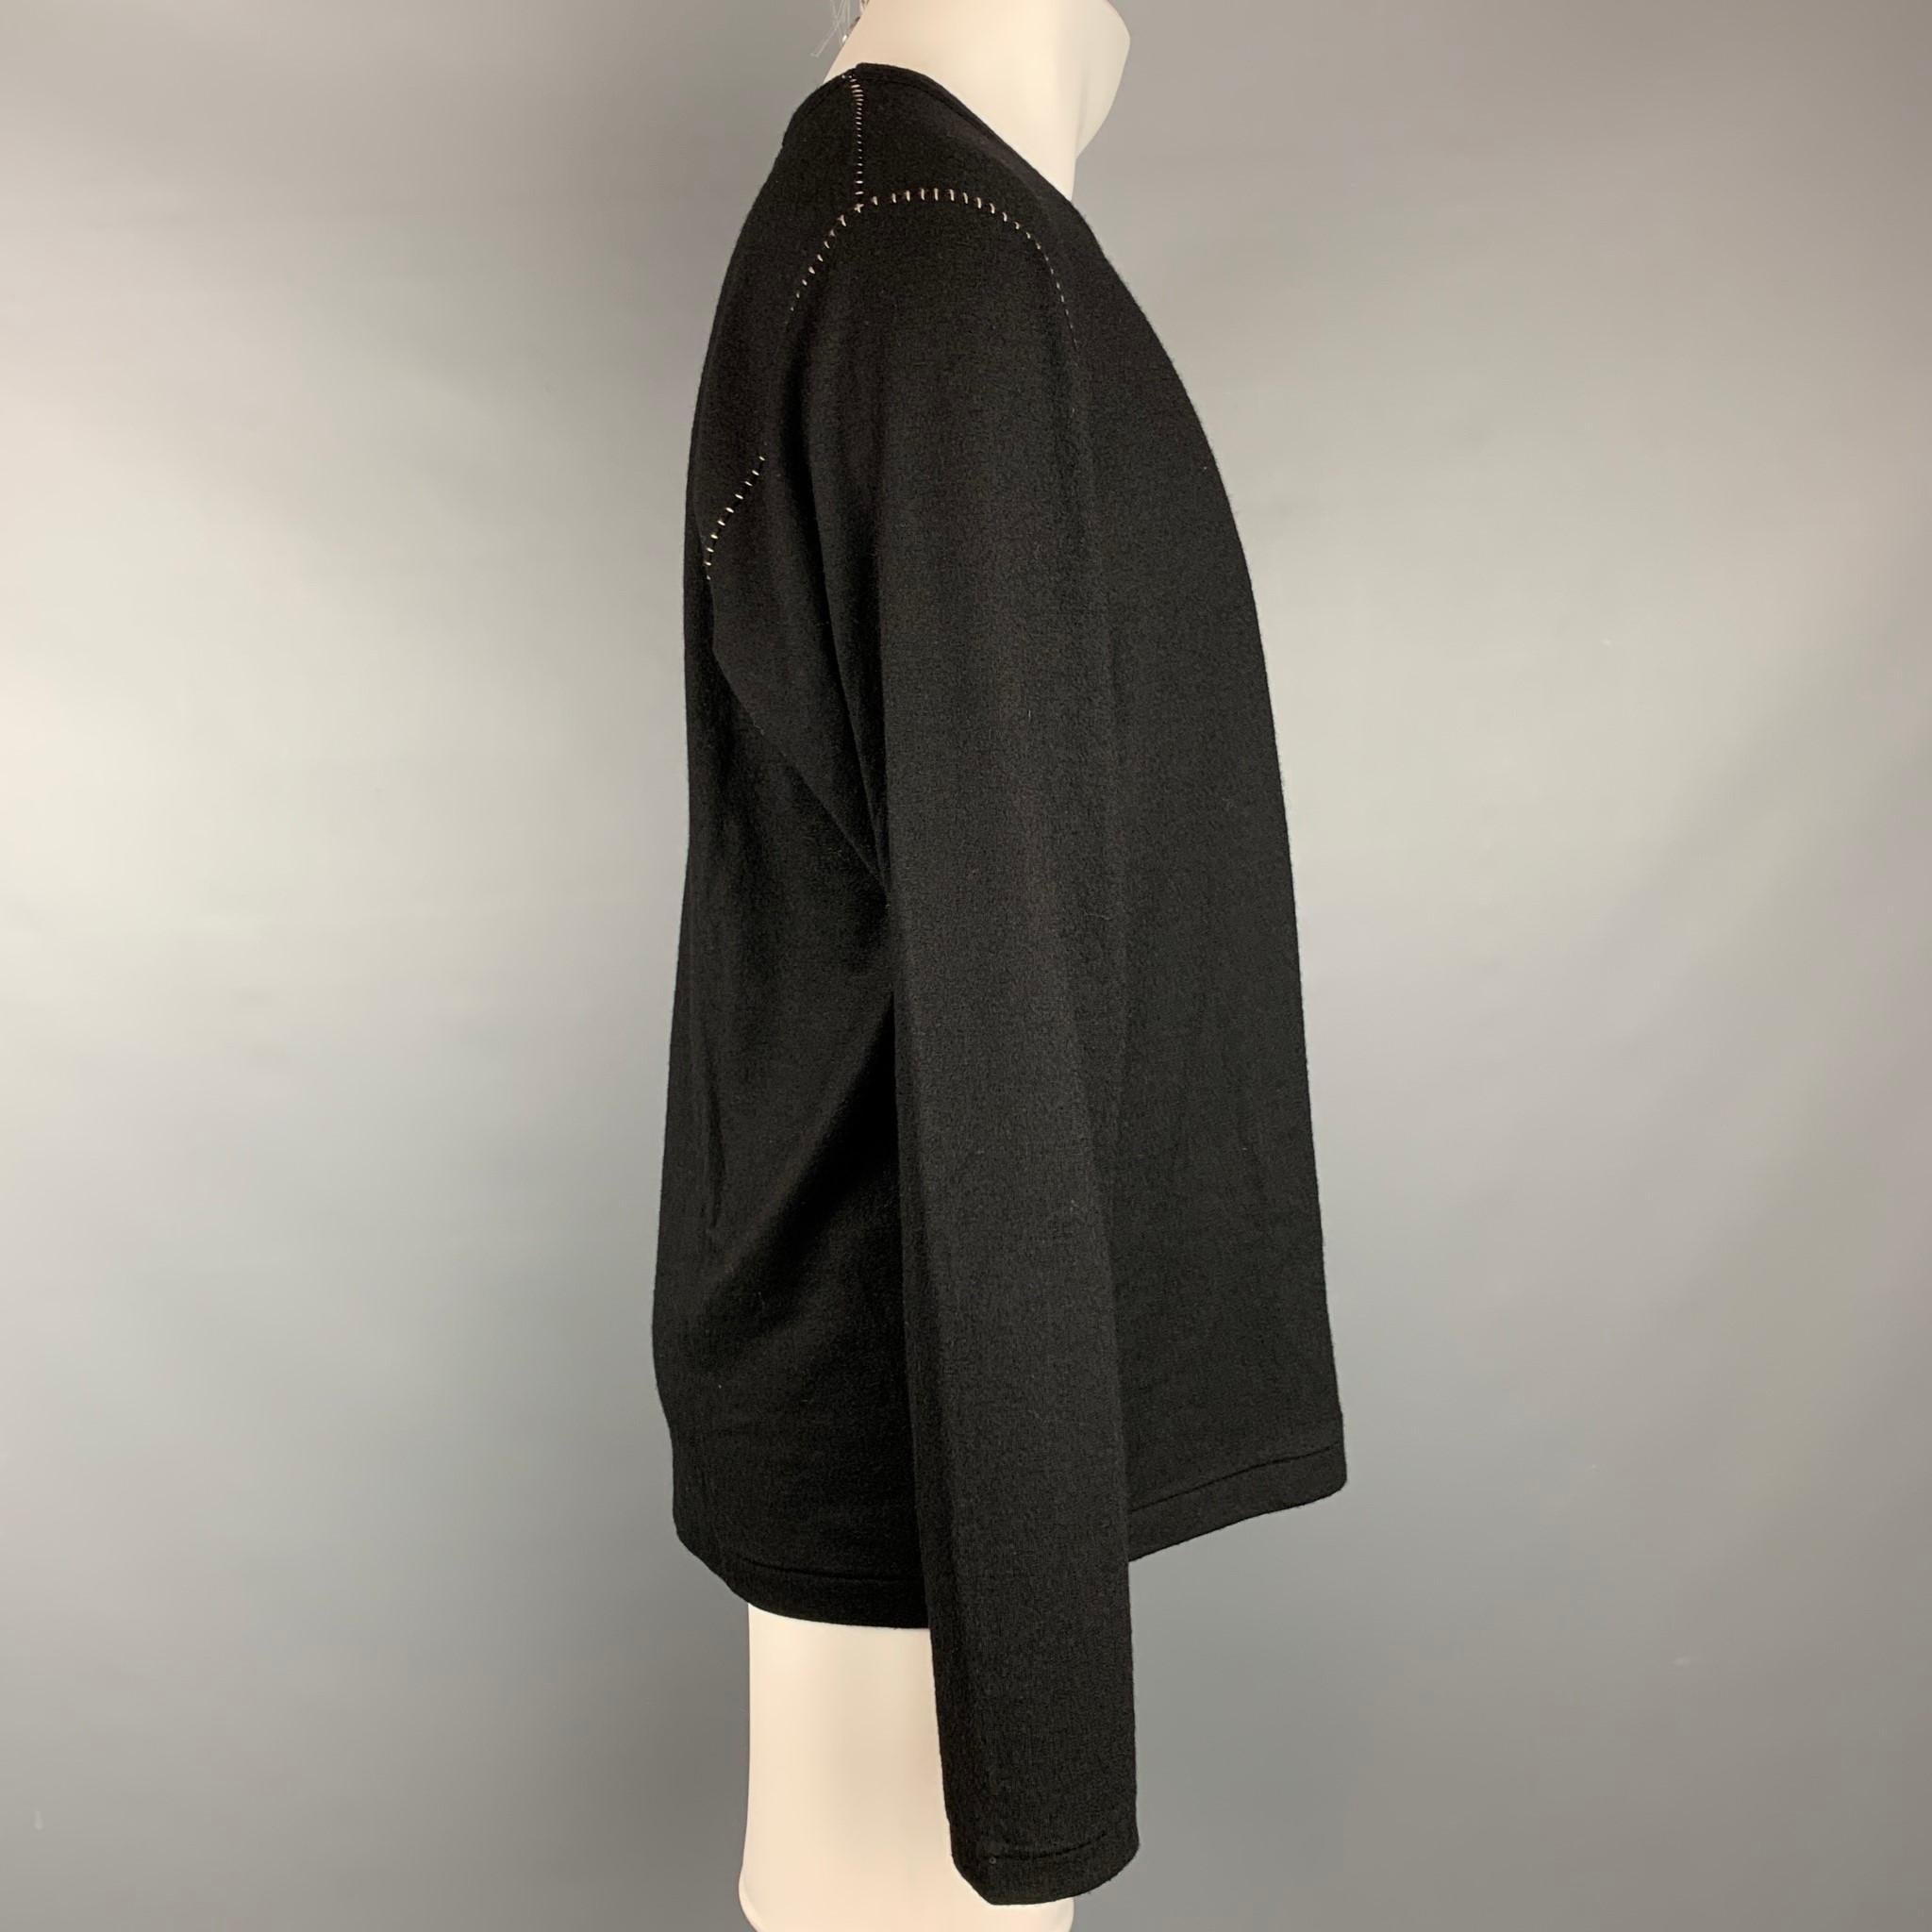 Y's by YOHJI YAMAMOTO pullover comes in a black wool with contrast stitching and a crew-neck. Made in Japan. 

Very Good Pre-Owned Condition.
Marked: JP 3

Measurements:

Shoulder: 19.5 in.
Chest: 44 in.
Sleeve: 27 in.
Length: 27.5 in. 

